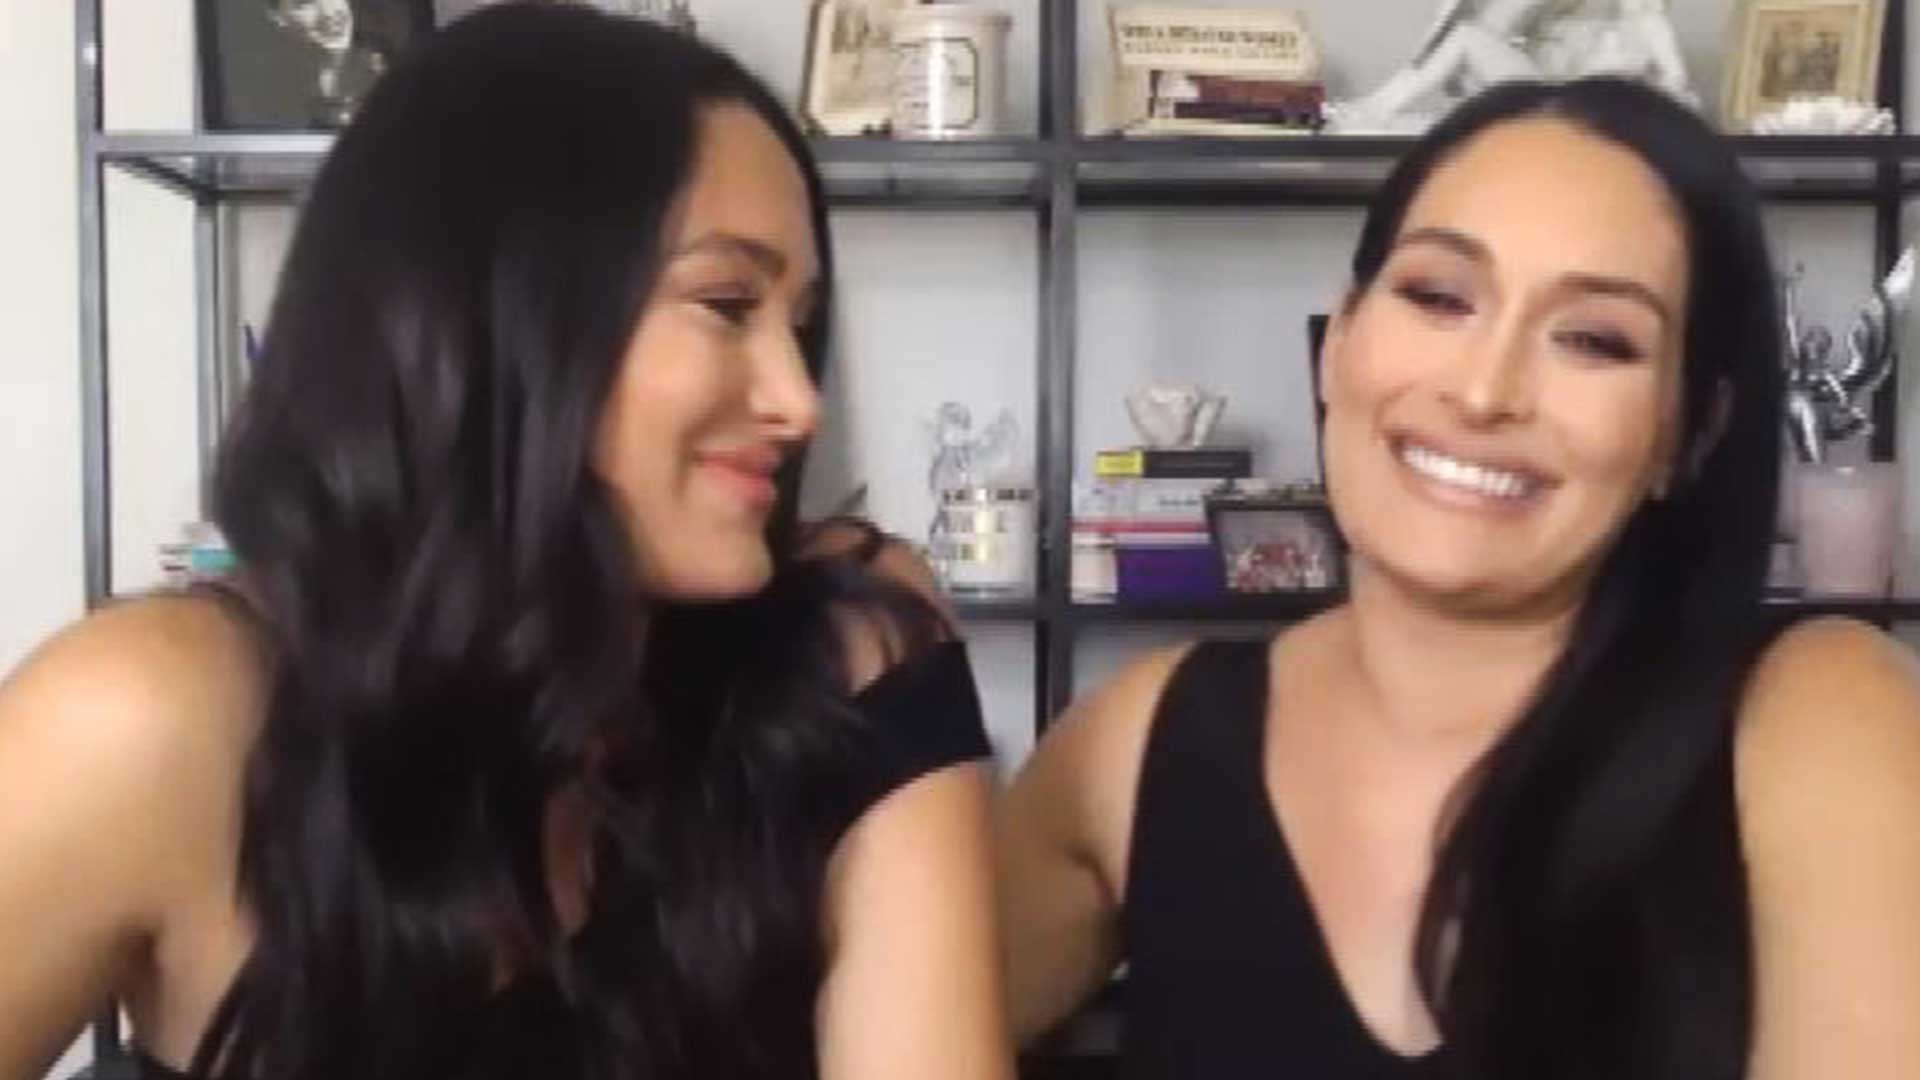 August 2nd 2020 - Brie Bella and Nikki Bella have both given birth